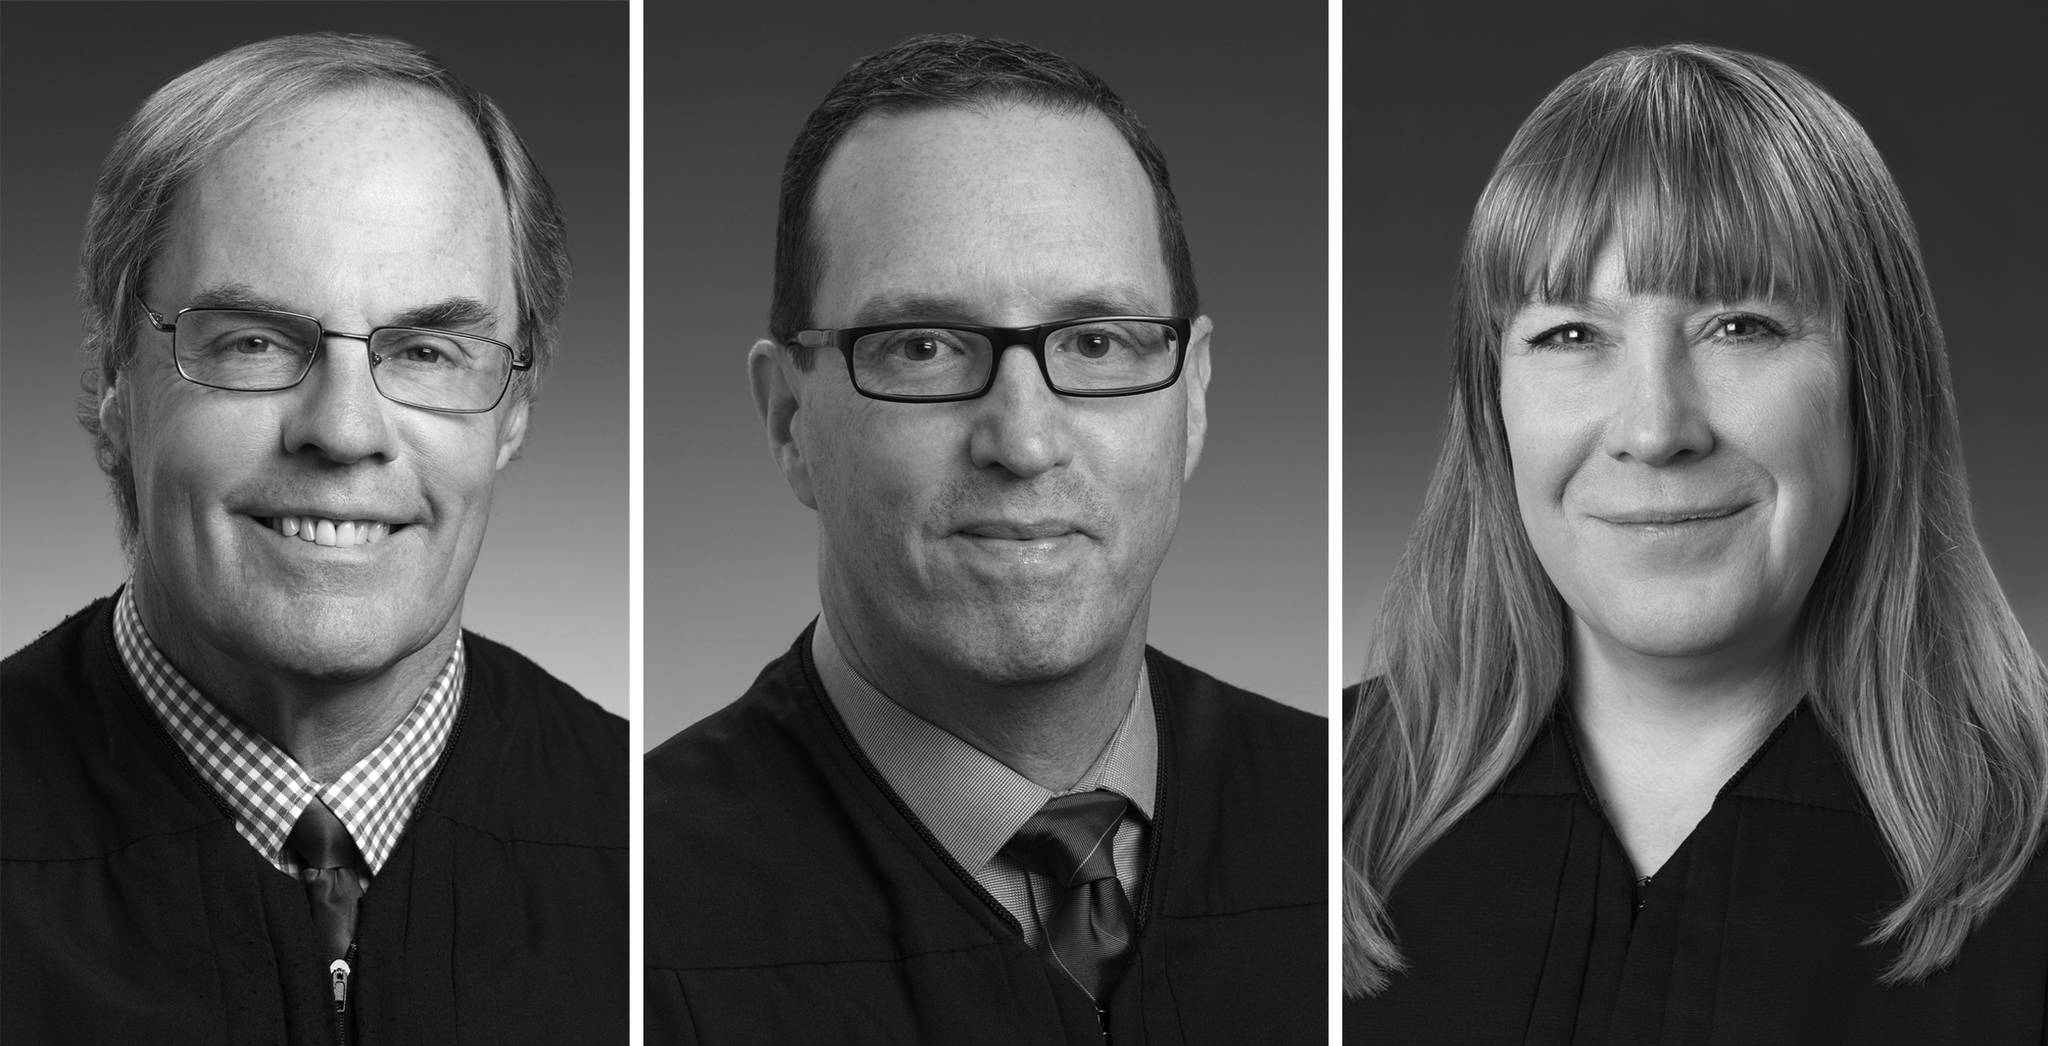 From left to right, Ketchikan Superior Court Judge William Carey, Ketchikan District Court Judge Kevin Miller and Juneau District Court Judge Kirsten Swanson are seen in their official judicial portraits provided by the Alaska Court System. All three judges are on the ballot this fall in Southeast Alaska. (Juneau Empire composite)